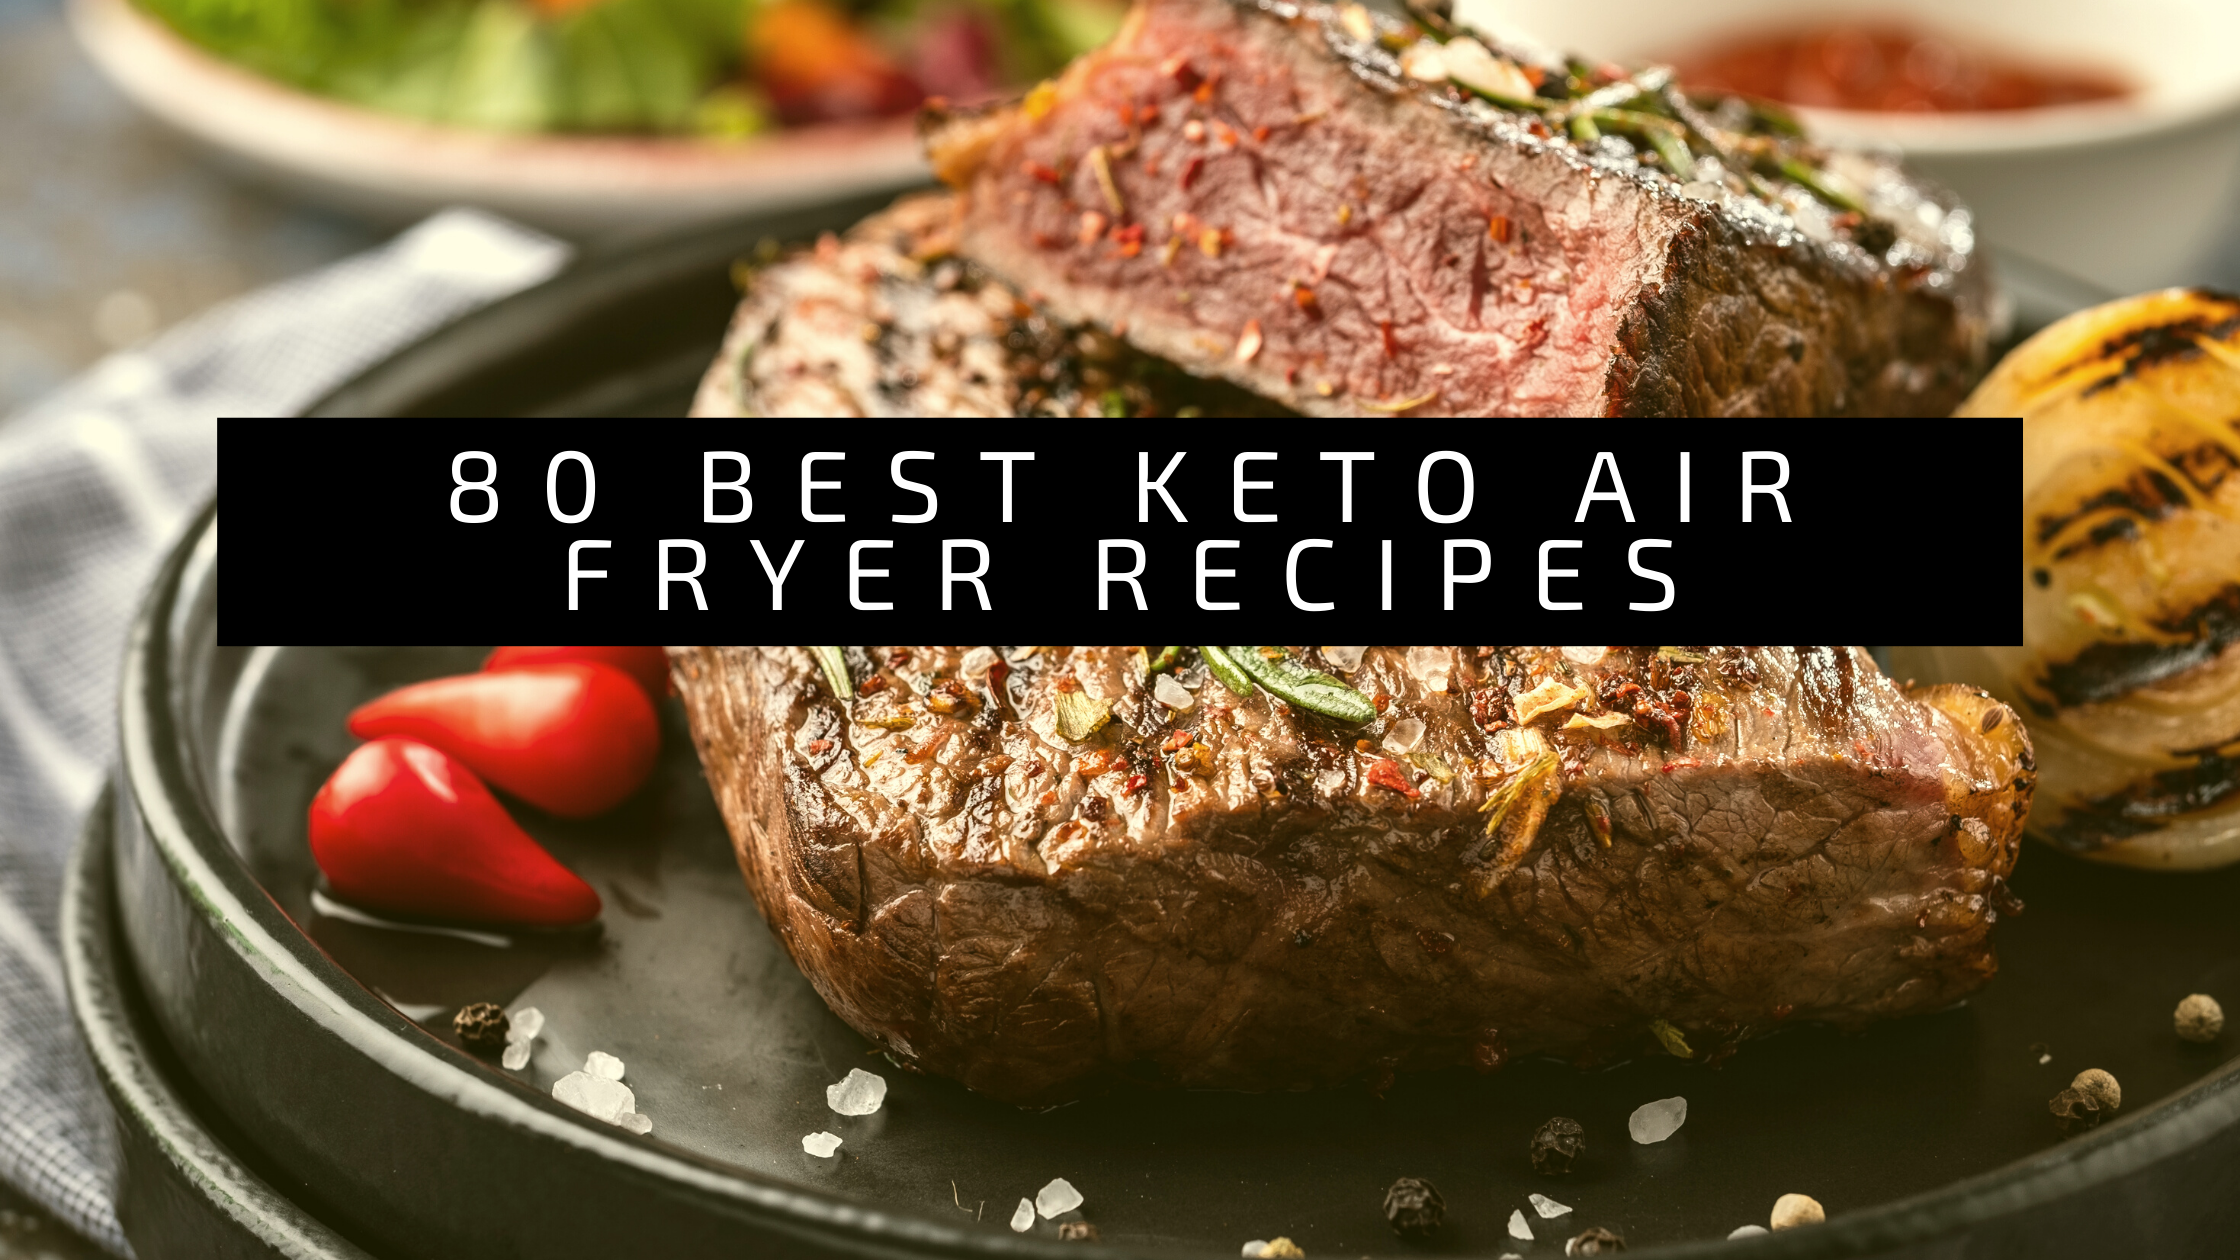 40 Family-Friendly Keto Air Fryer Recipes for Quick and Delicious Meals 11